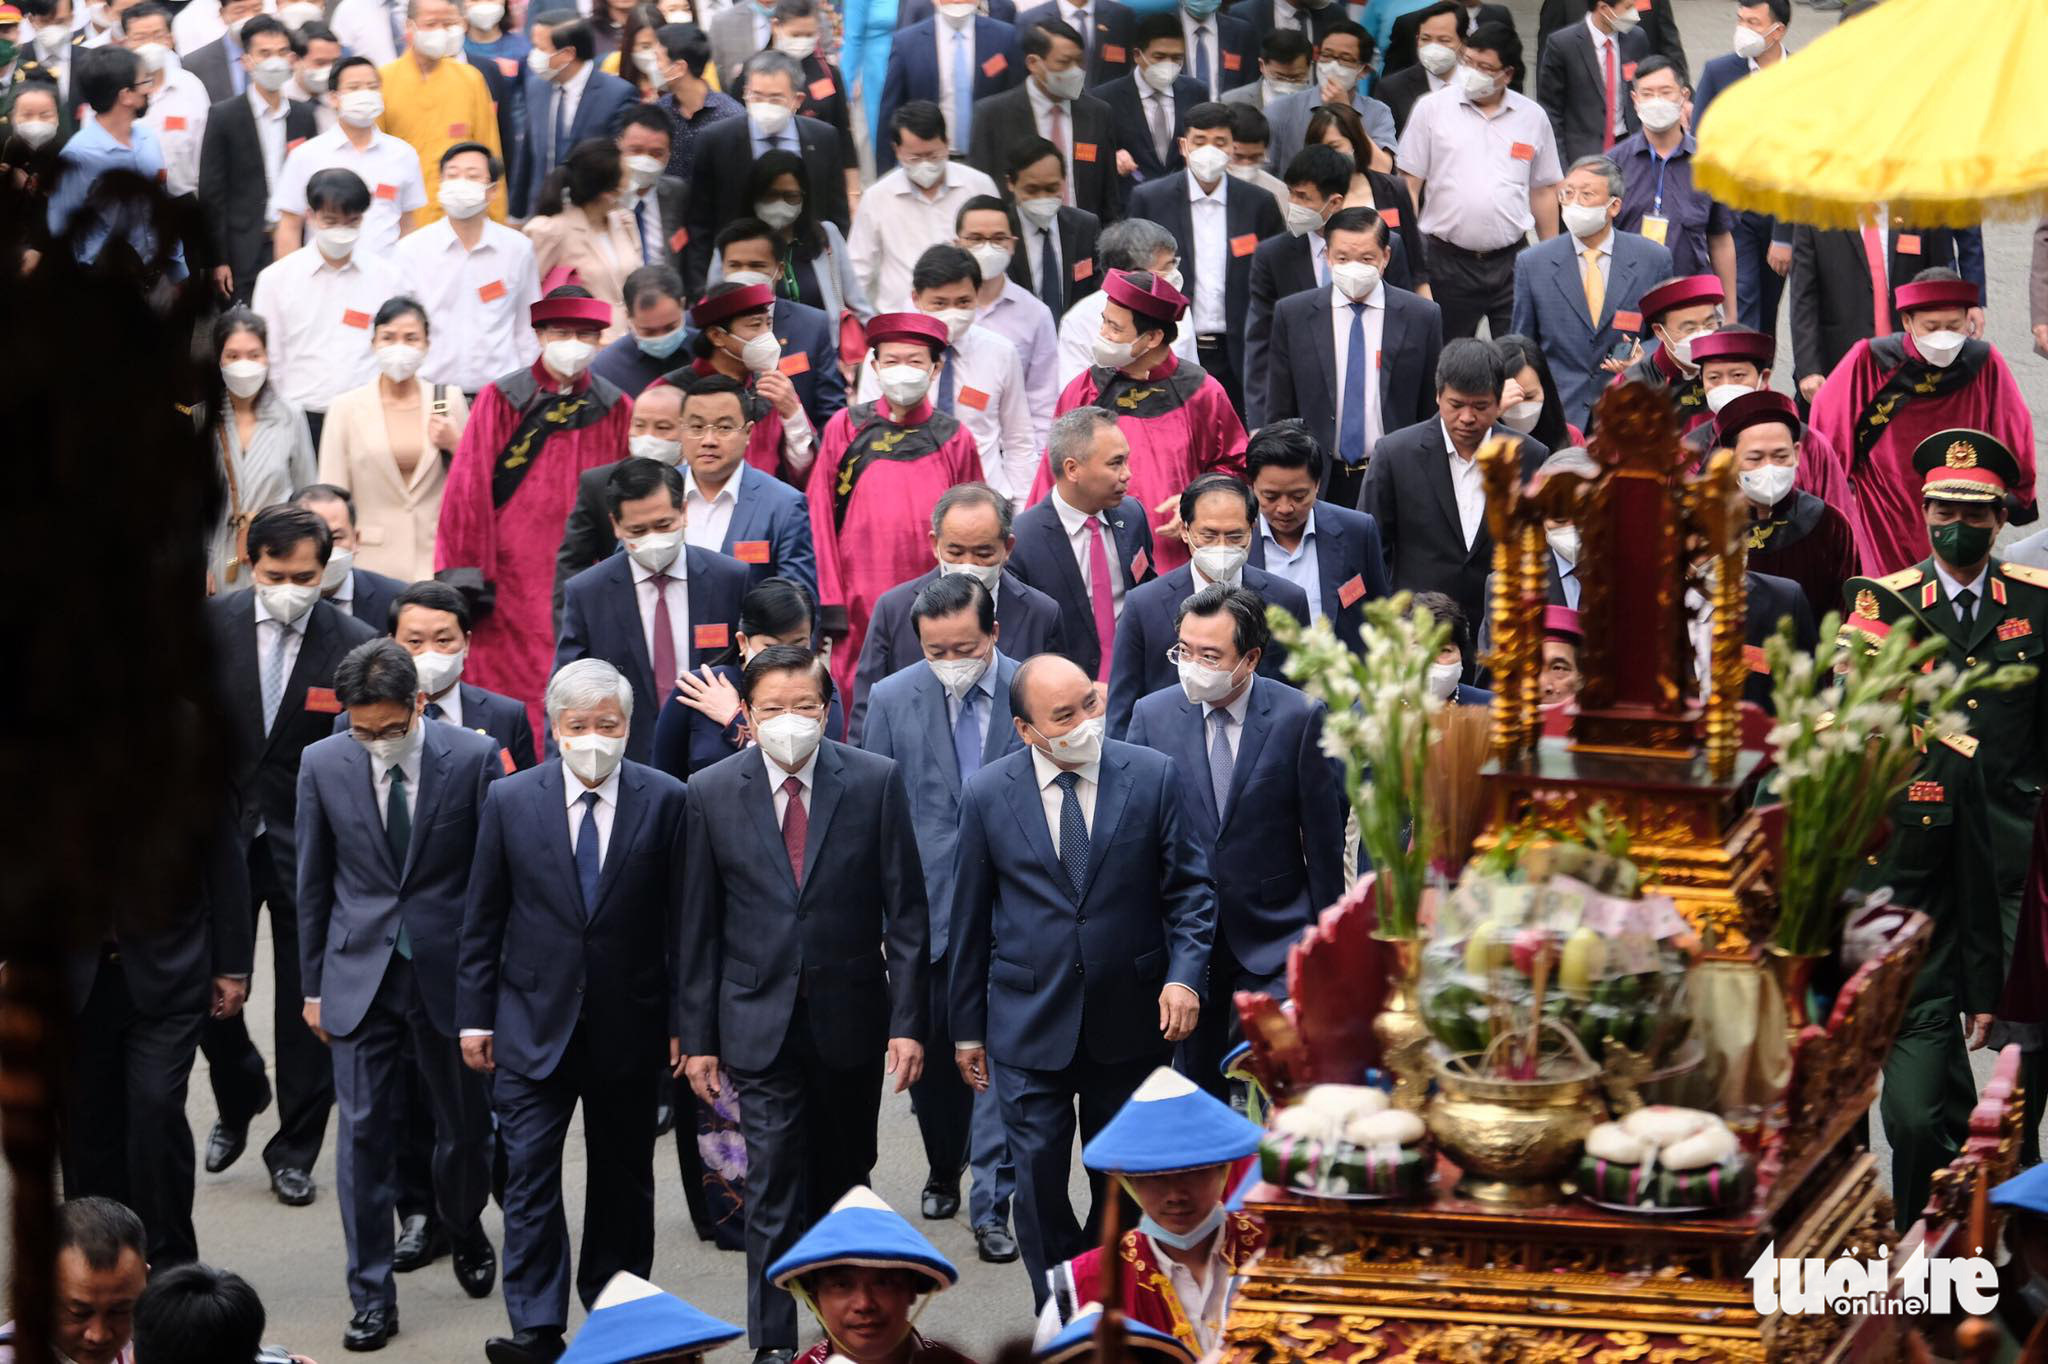 State President Nguyen Xuan Phuc and a high-ranking delegation visit the Hung Kings Temple in Phu Tho Province, Vietnam, April 10, 2022. Photo: Nam Tran / Tuoi Tre